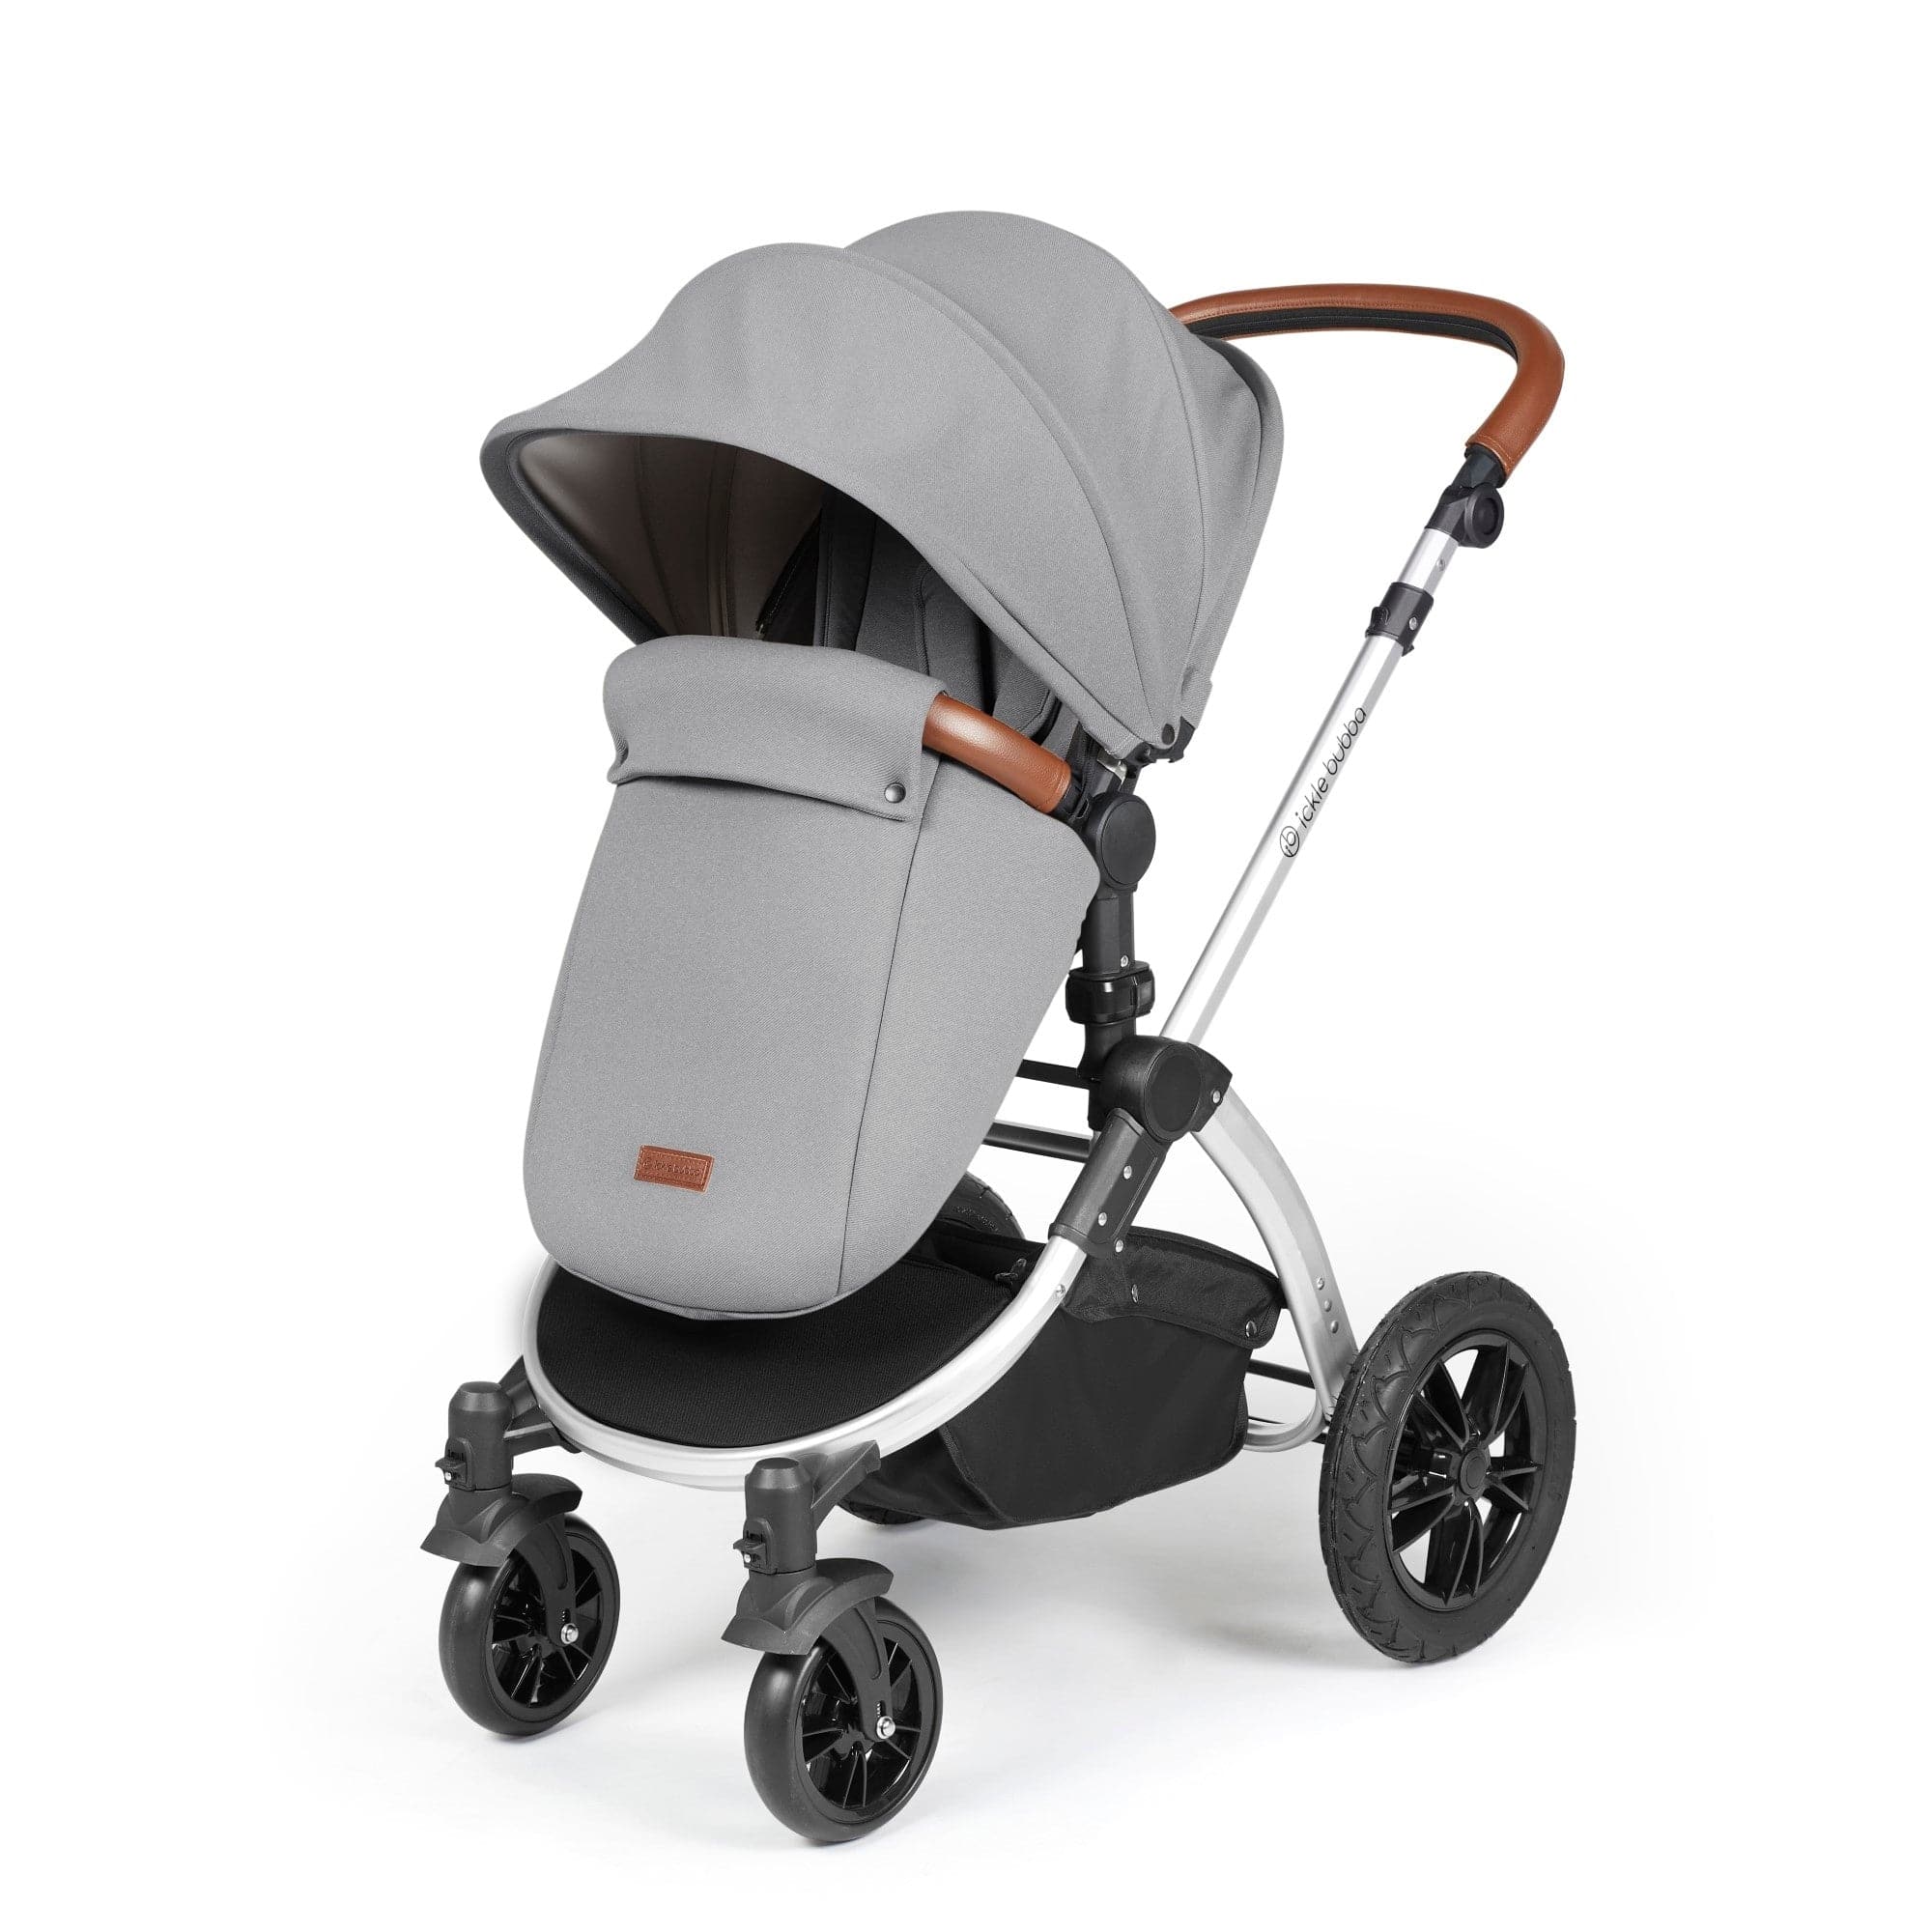 Ickle Bubba Stomp Luxe All-in-One I-Size Travel System With Isofix Base - Silver / Pearl Grey / Tan - For Your Little One